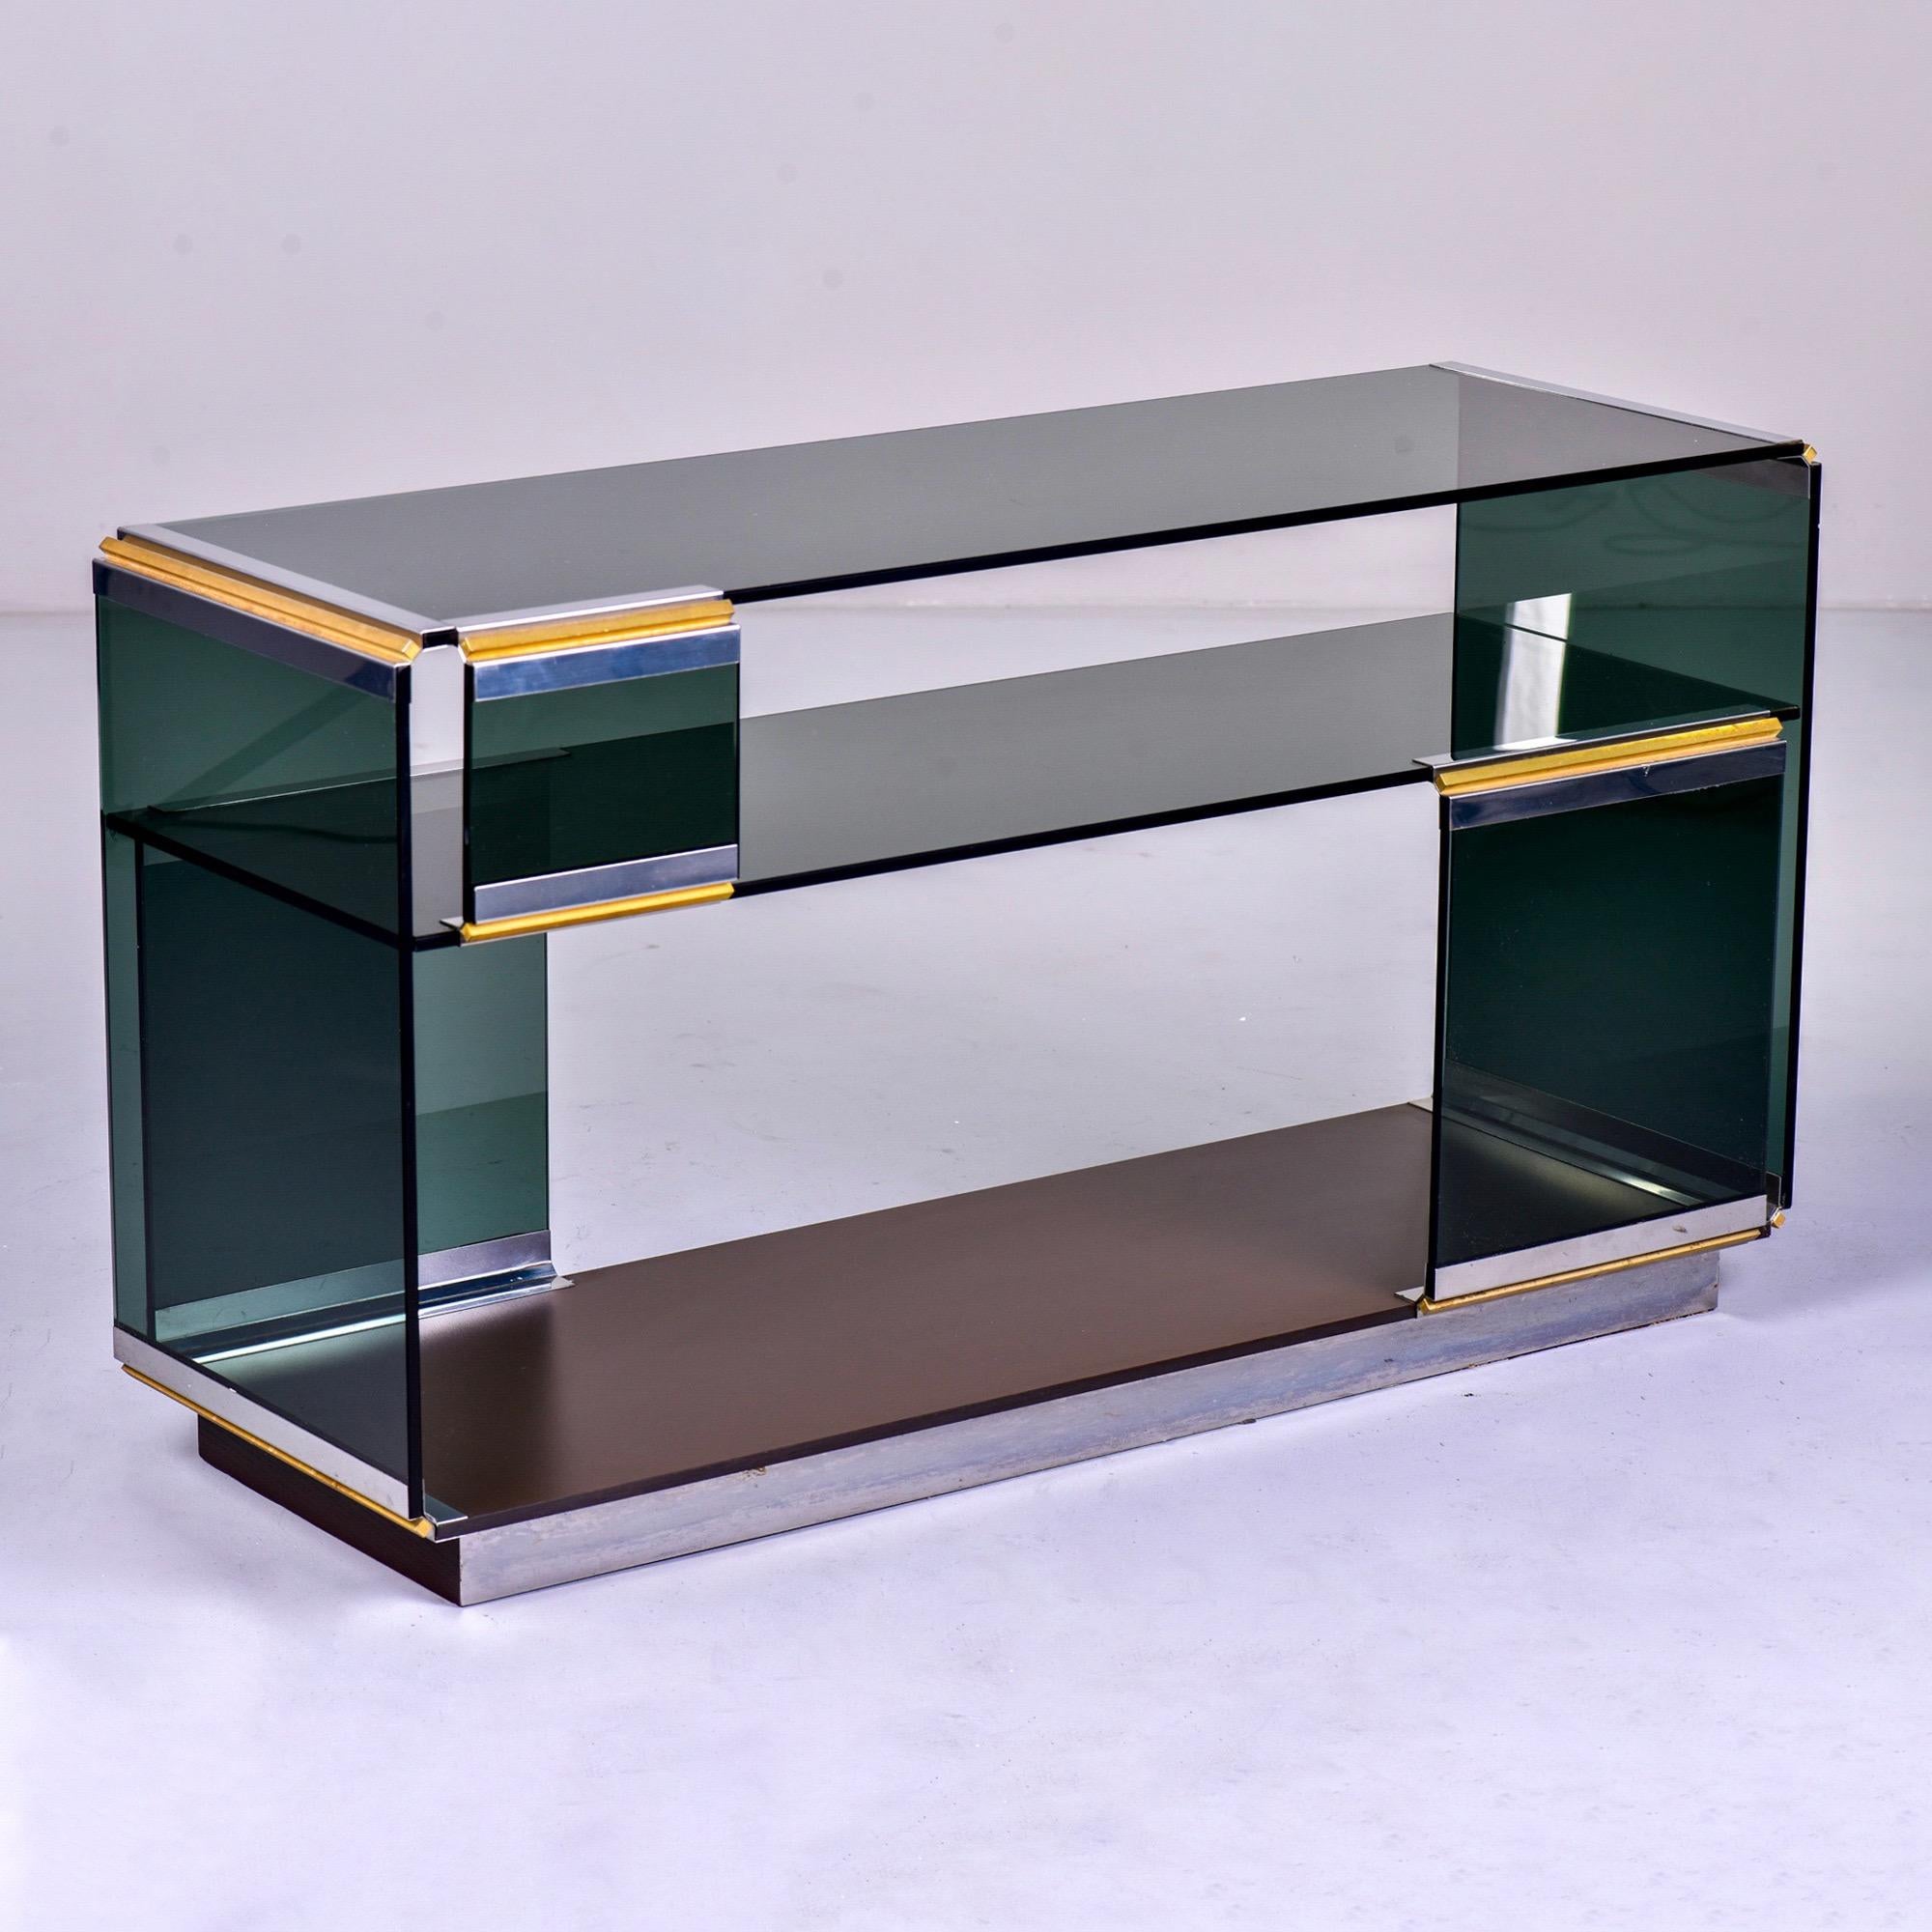 Console attributed to Romeo Rega of Italy, circa 1970s. Smoked glass panels set in polished nickel frame with brass accents.

Overall very good condition with some scattered nicks/wear to glass. Some rust/wear to metal at base. See detail photos.